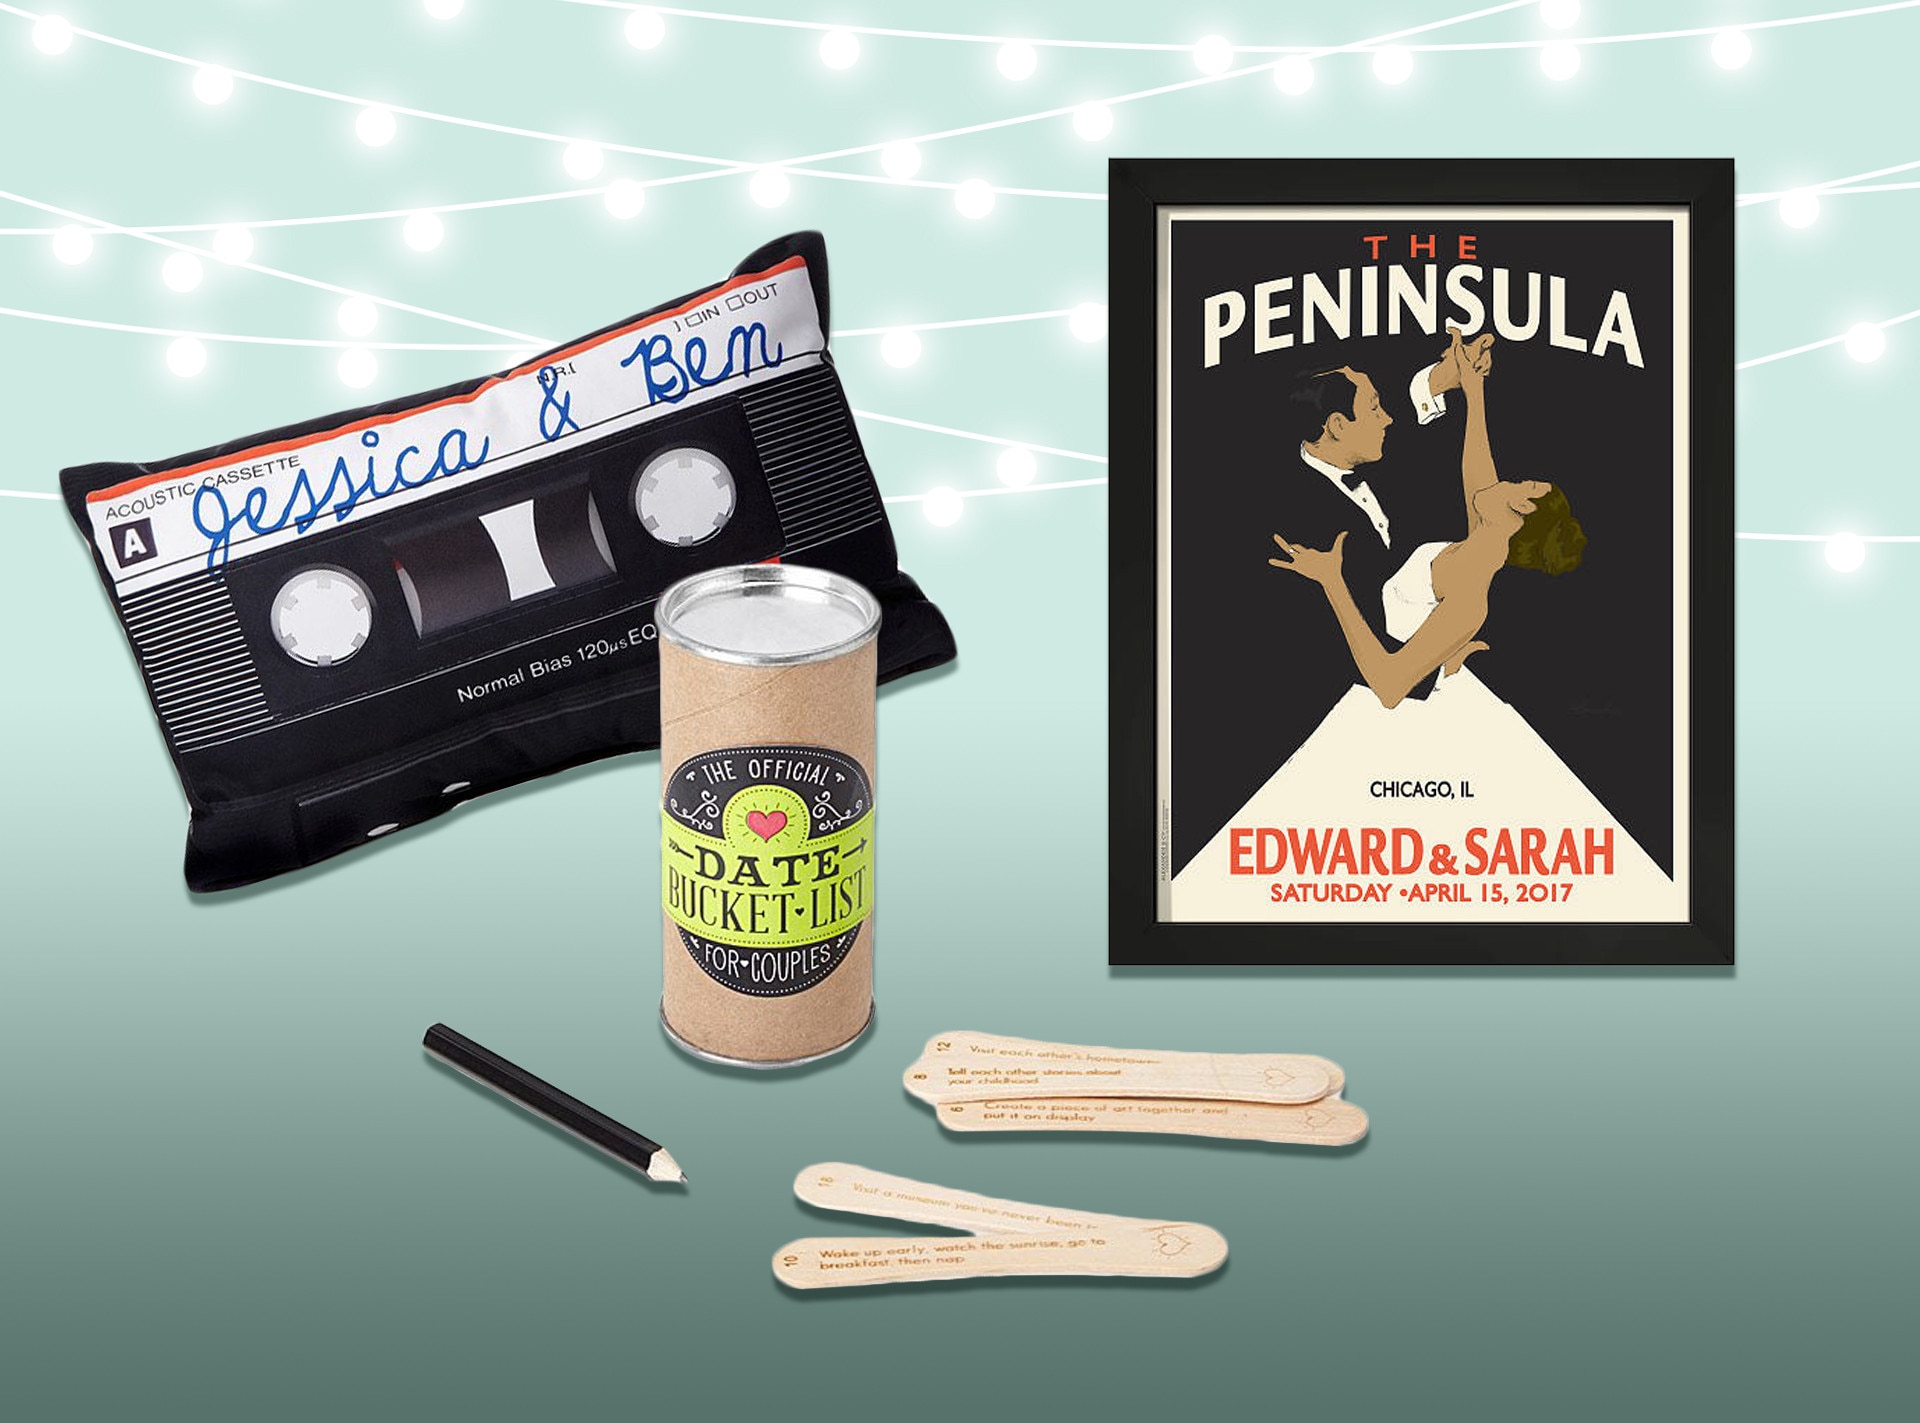 10 Cool Electronic Items That Are Great Wedding Gifts in 2020!